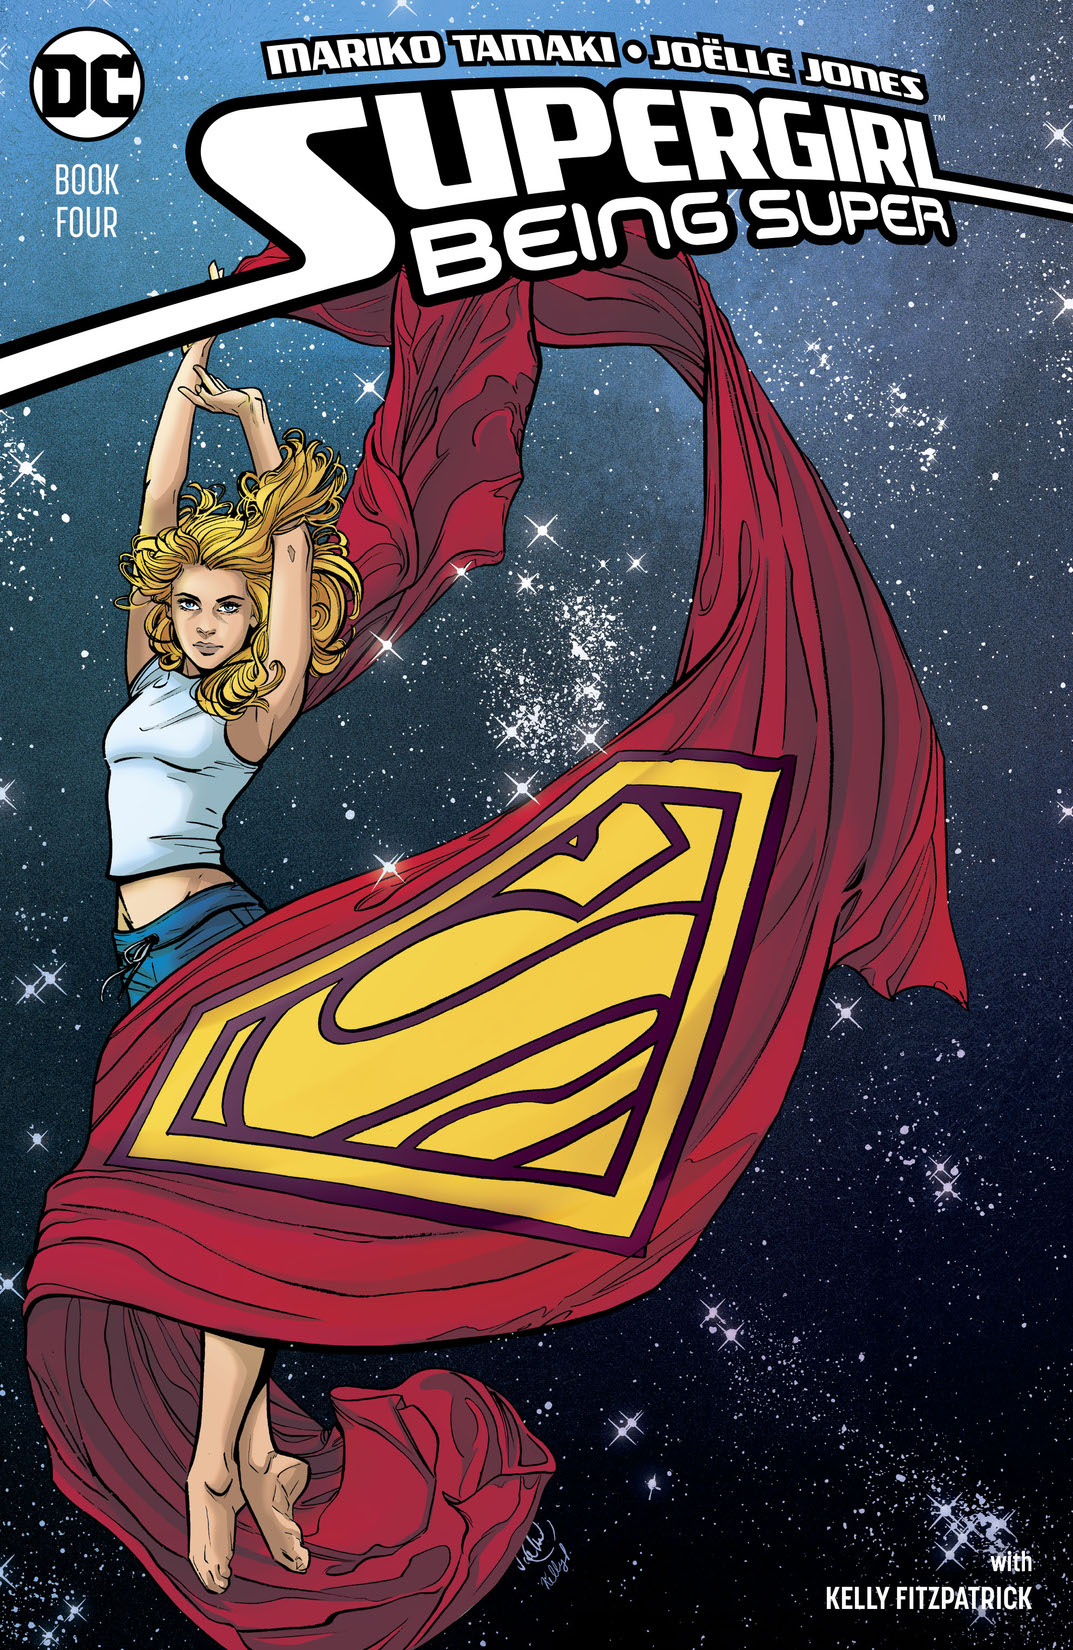 Supergirl: Being Super #4 preview images